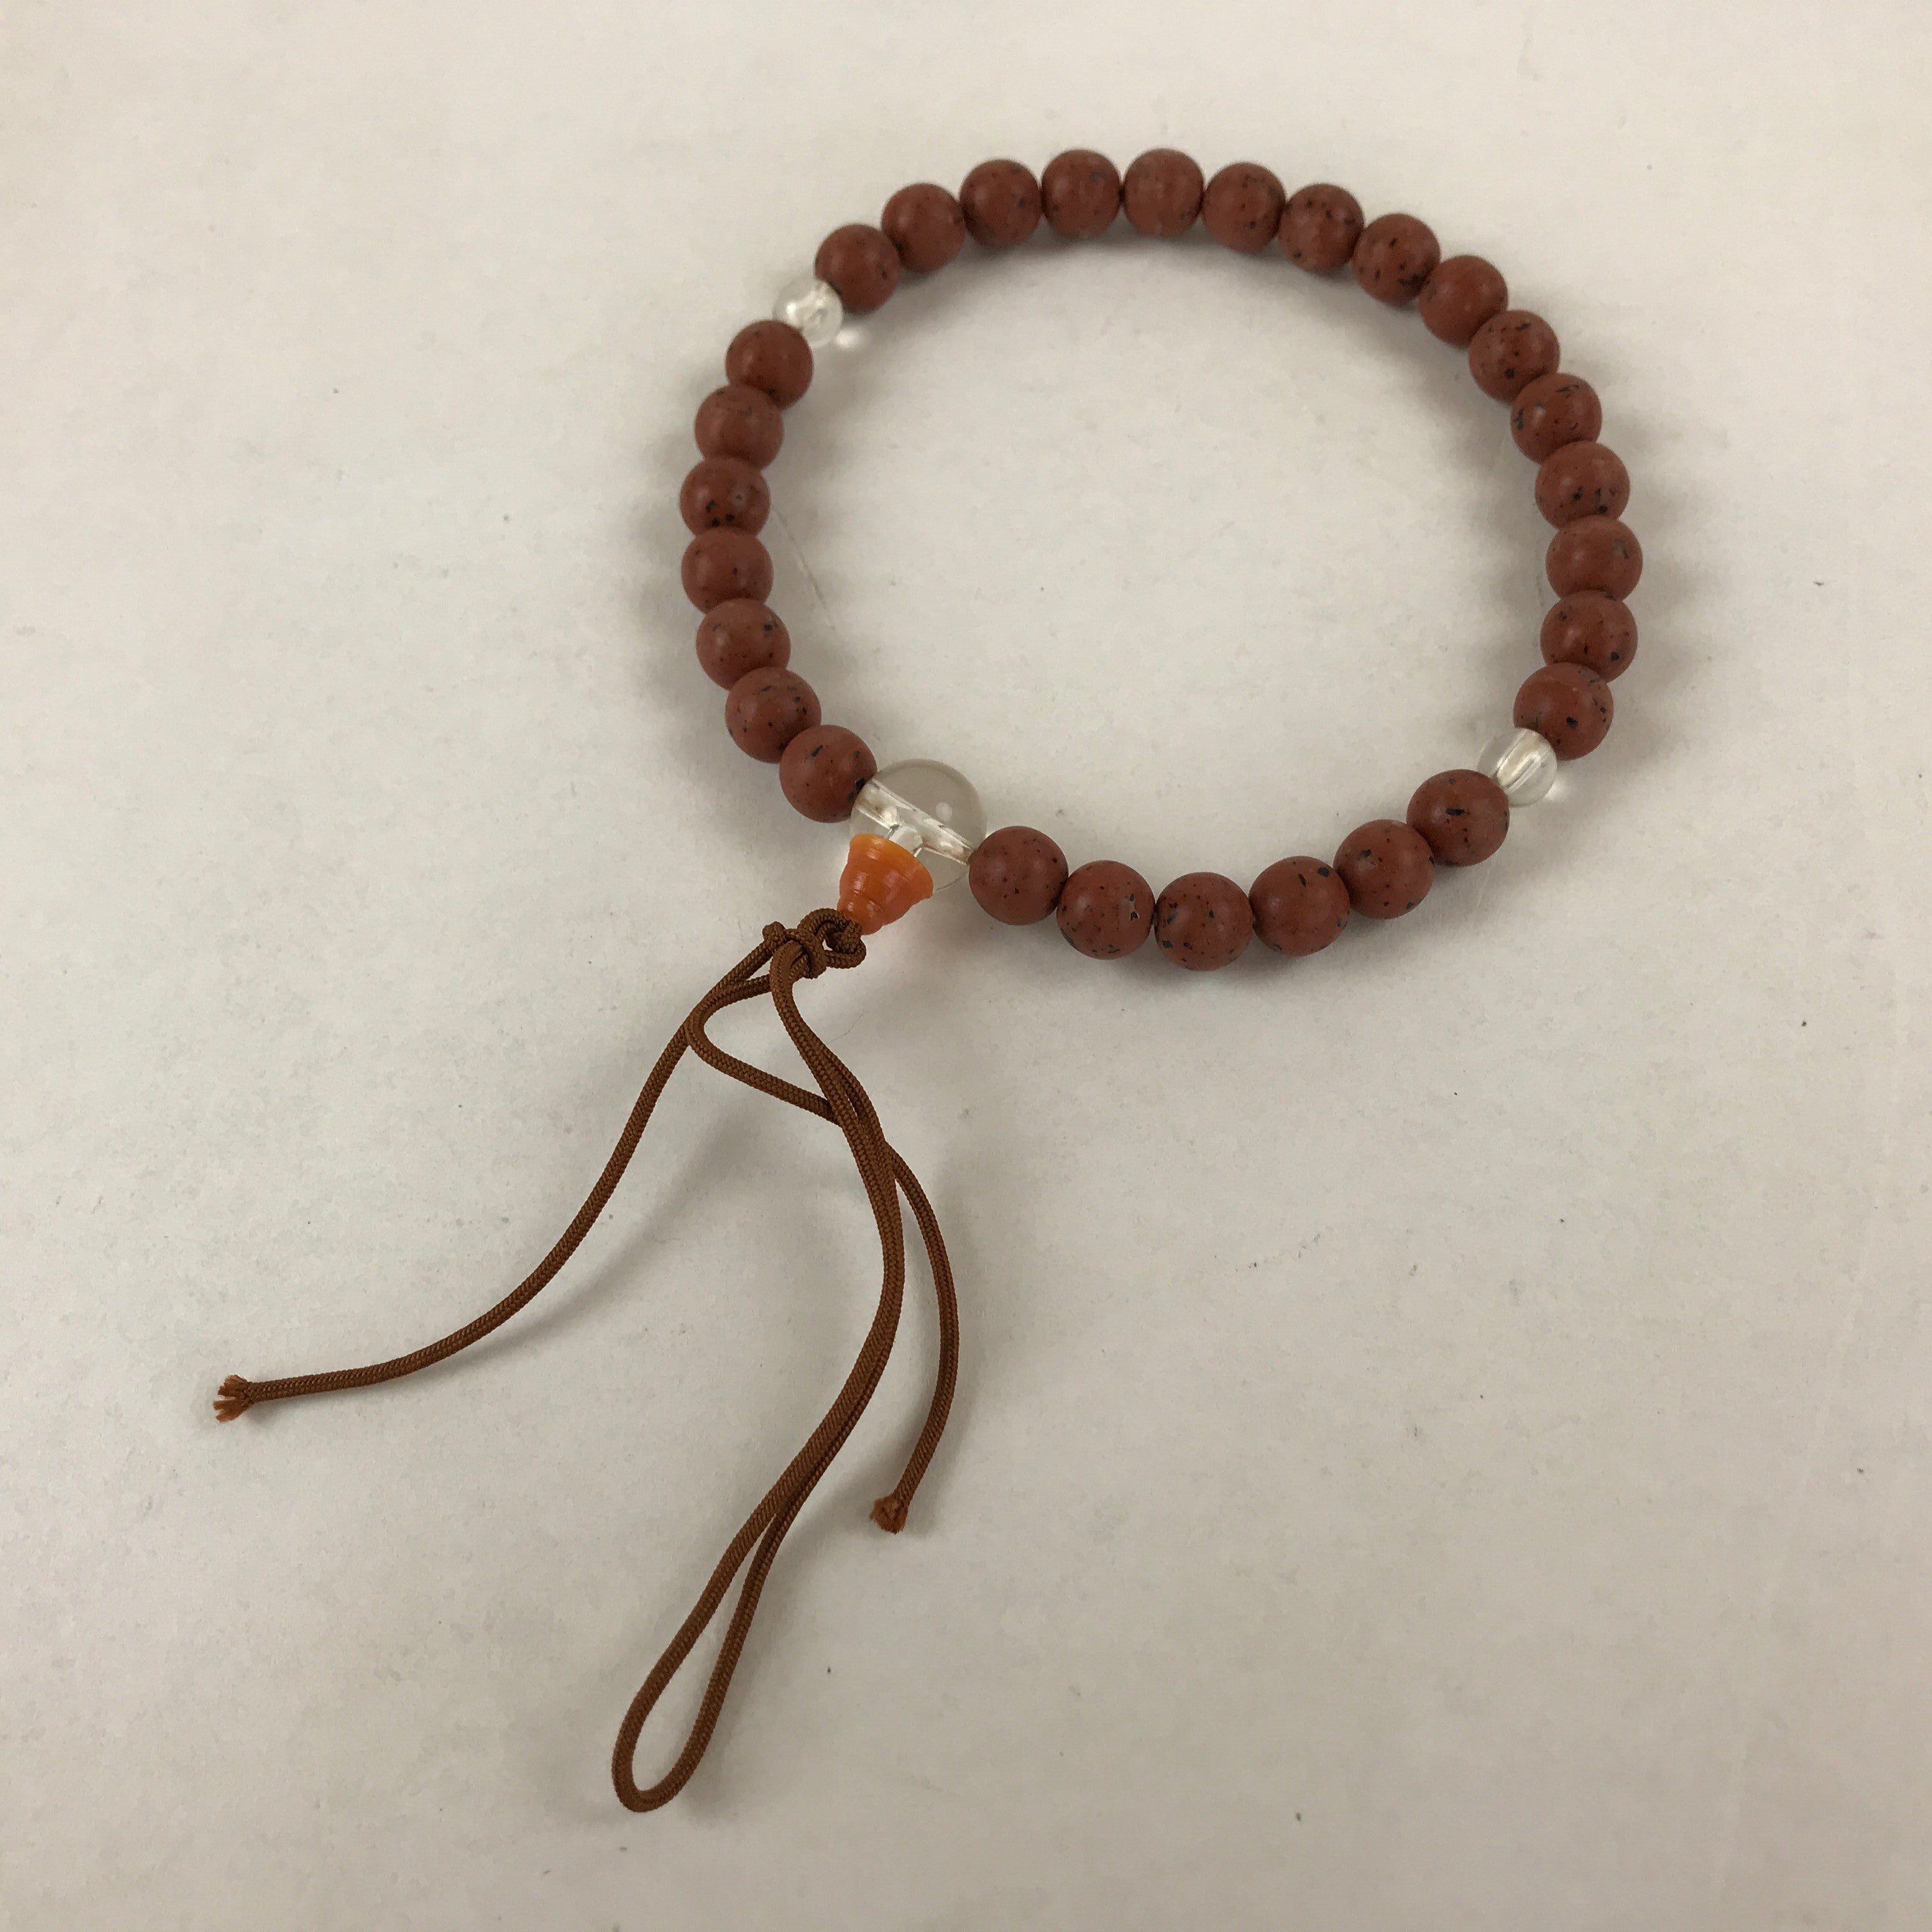 How to choose your Buddhist bracelet? - Artisan d'Asie